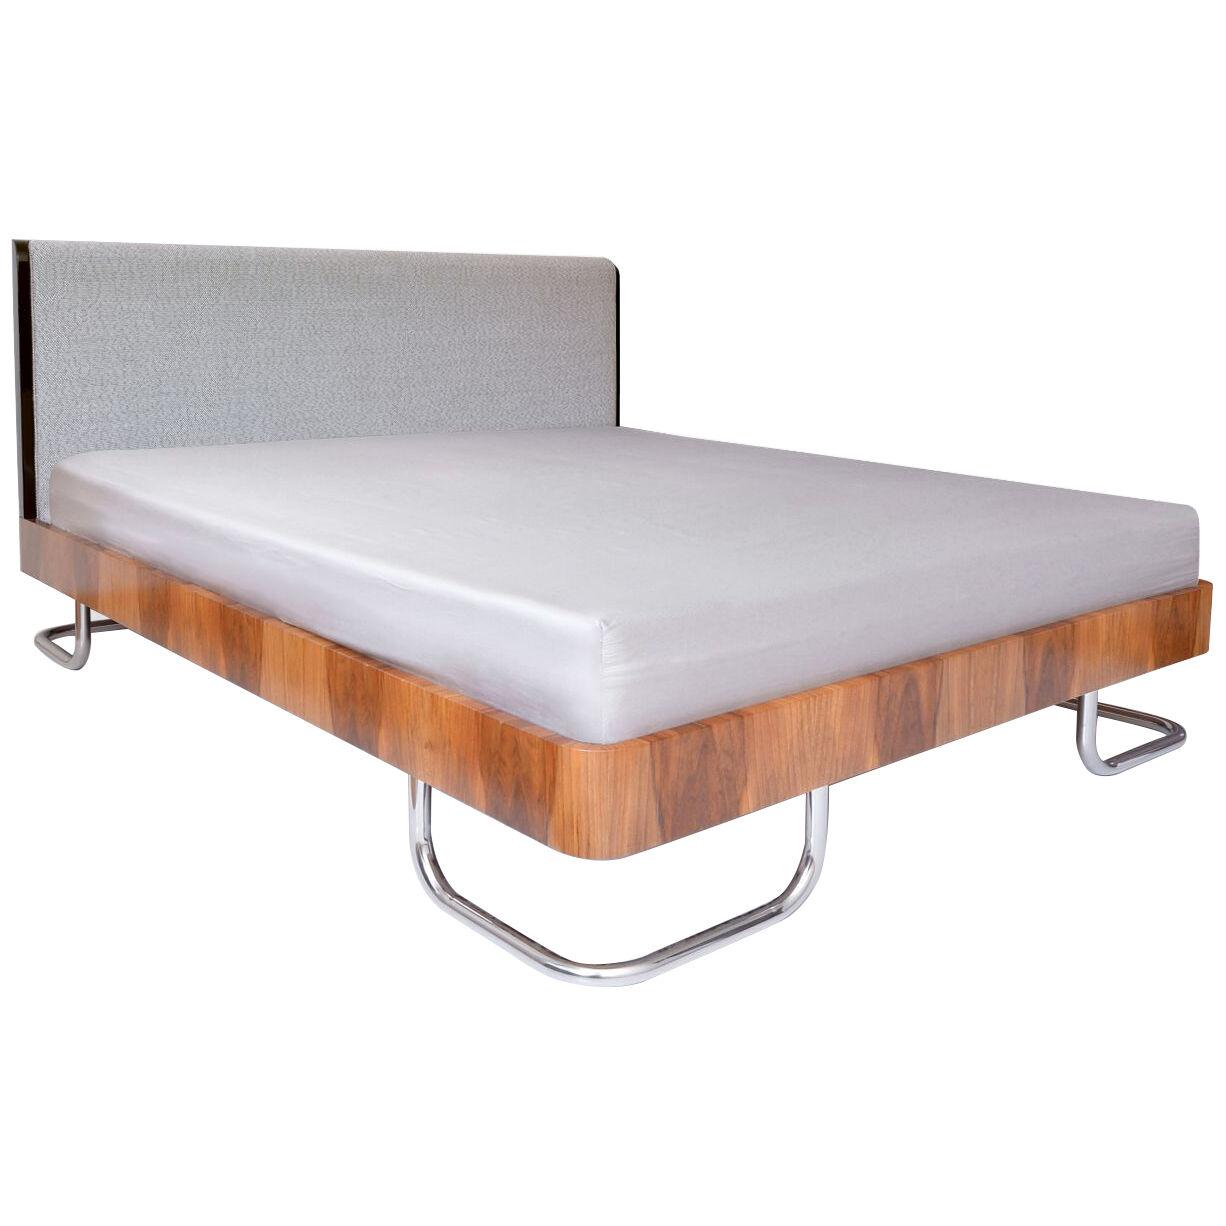 Modern contemporary customizable double bed in handcrafted wood